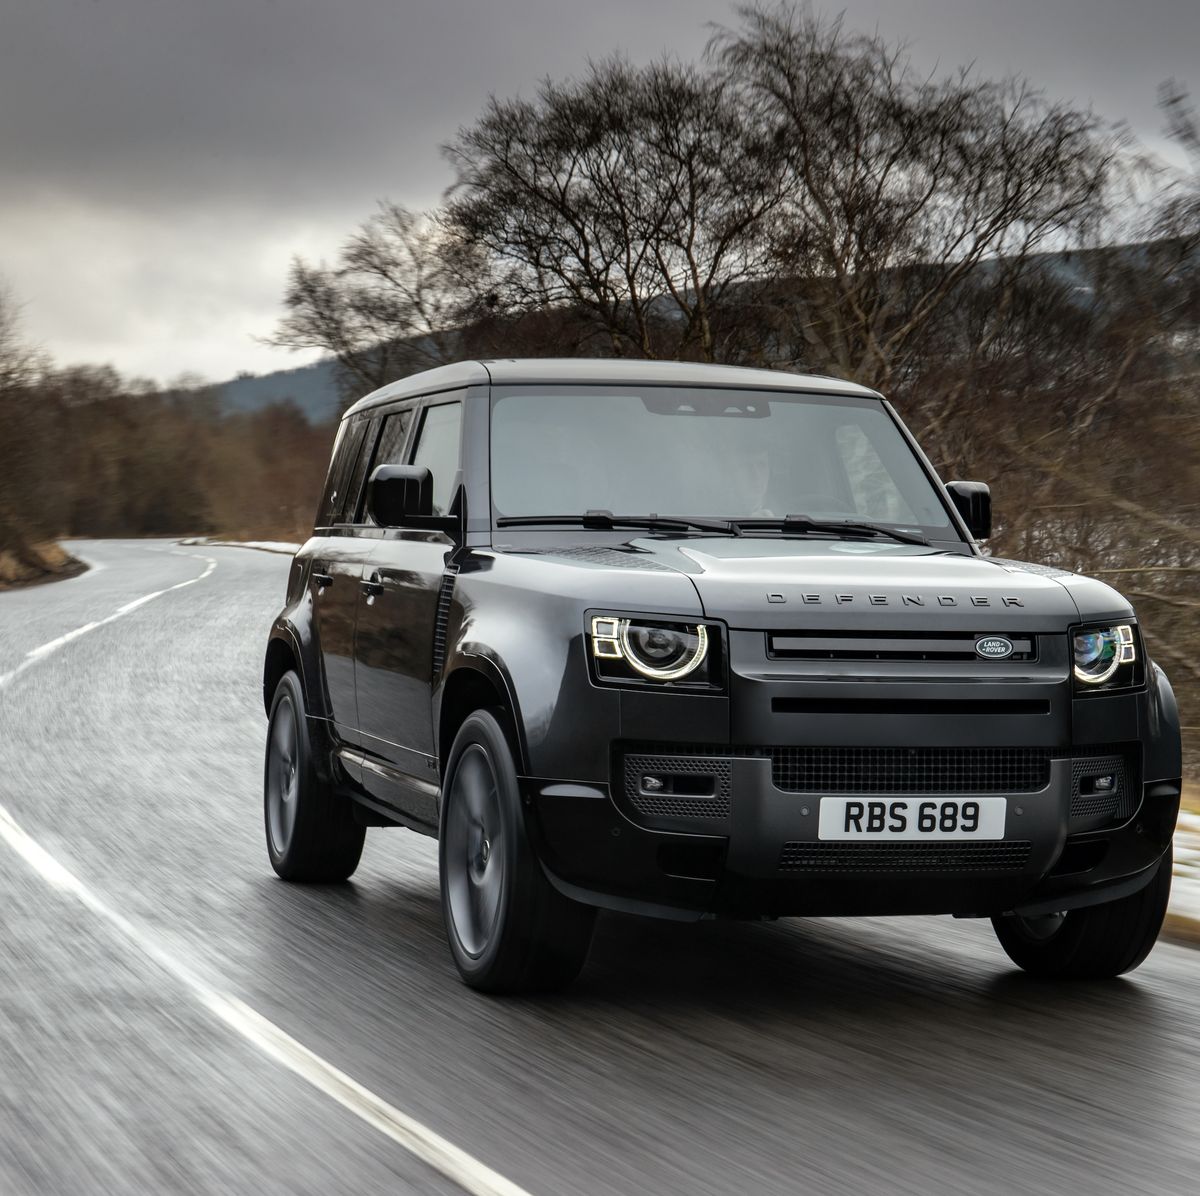 stoel mesh Overleven The Complete Land Rover Buying Guide